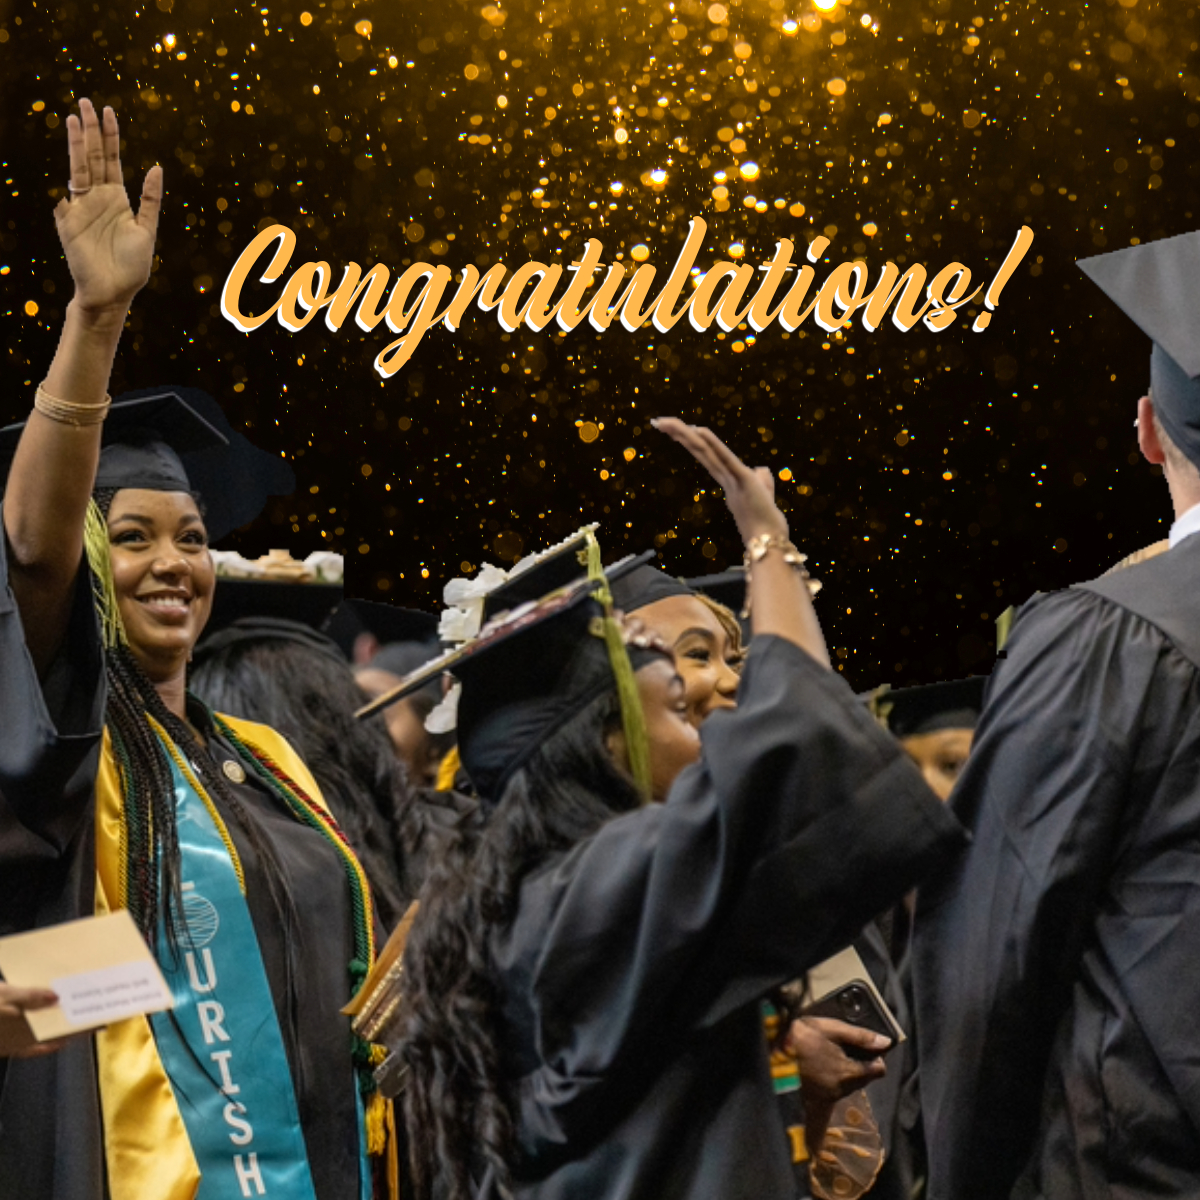 We can't wait to celebrate our December CHS graduates this Friday, December 15 at 2 PM. Join us by livestream link: loom.ly/P8Z9VaY. Together let's congratulate and wish our graduates well as they embark on the next leg of their journey.